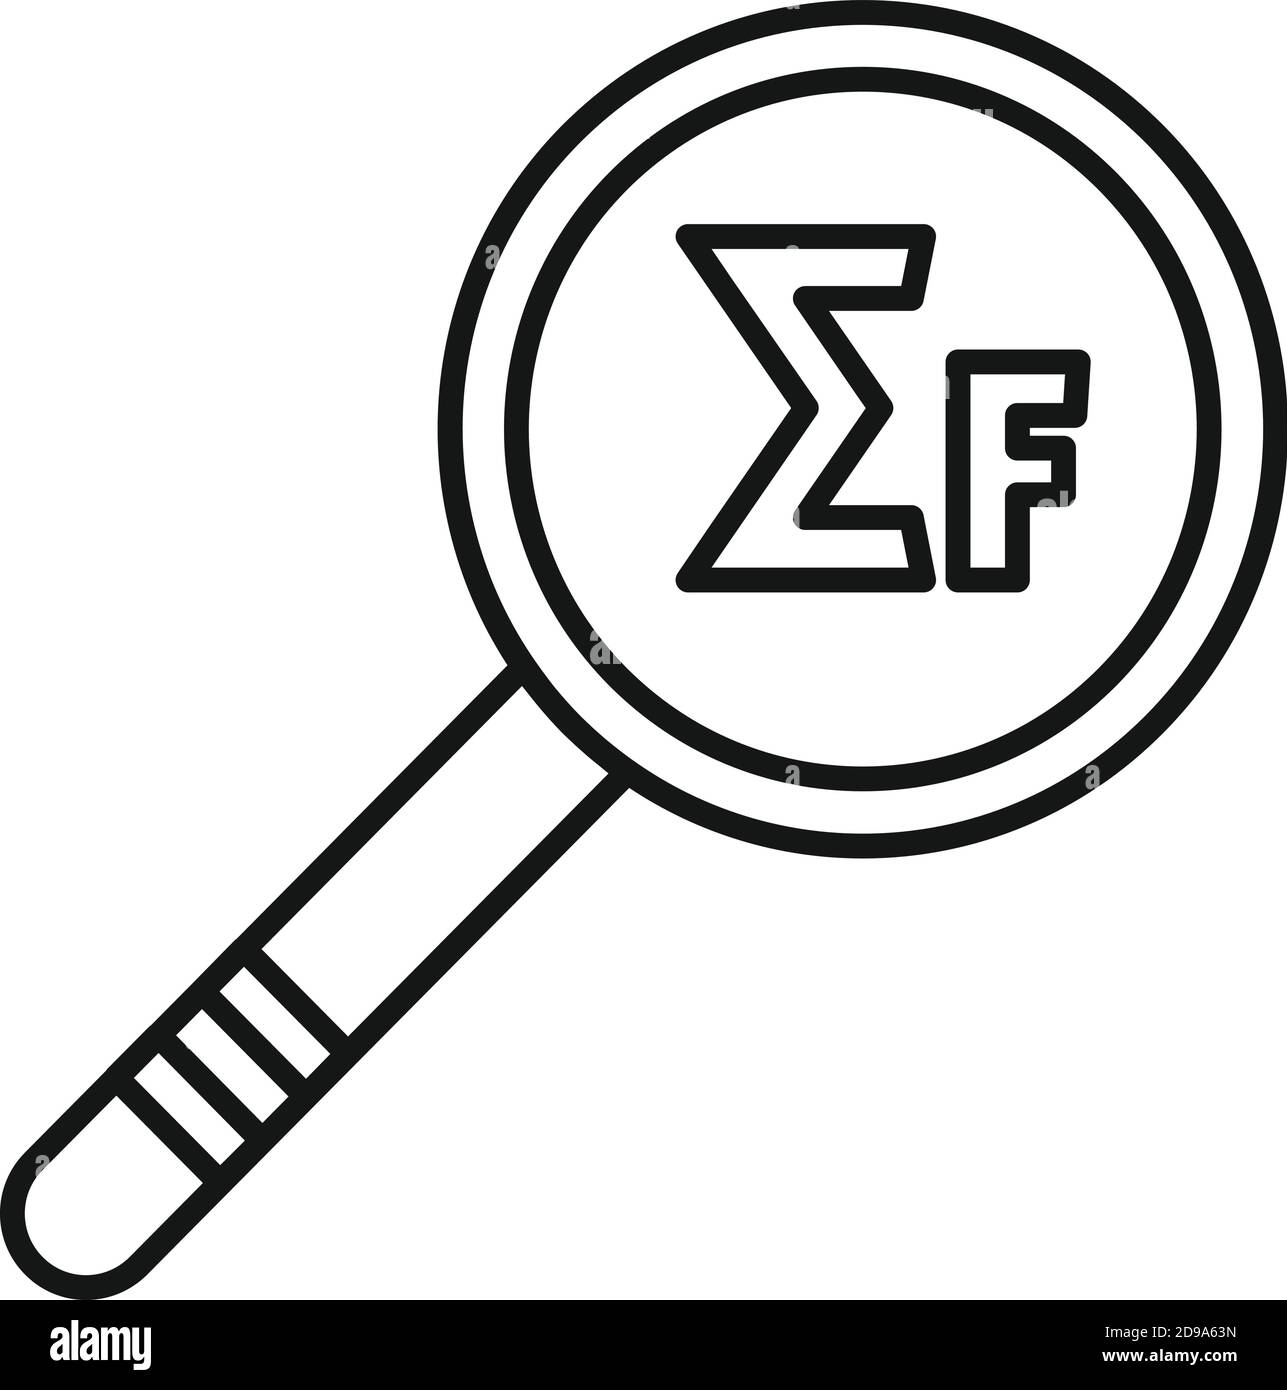 Newton force magnifier icon, outline style Stock Vector